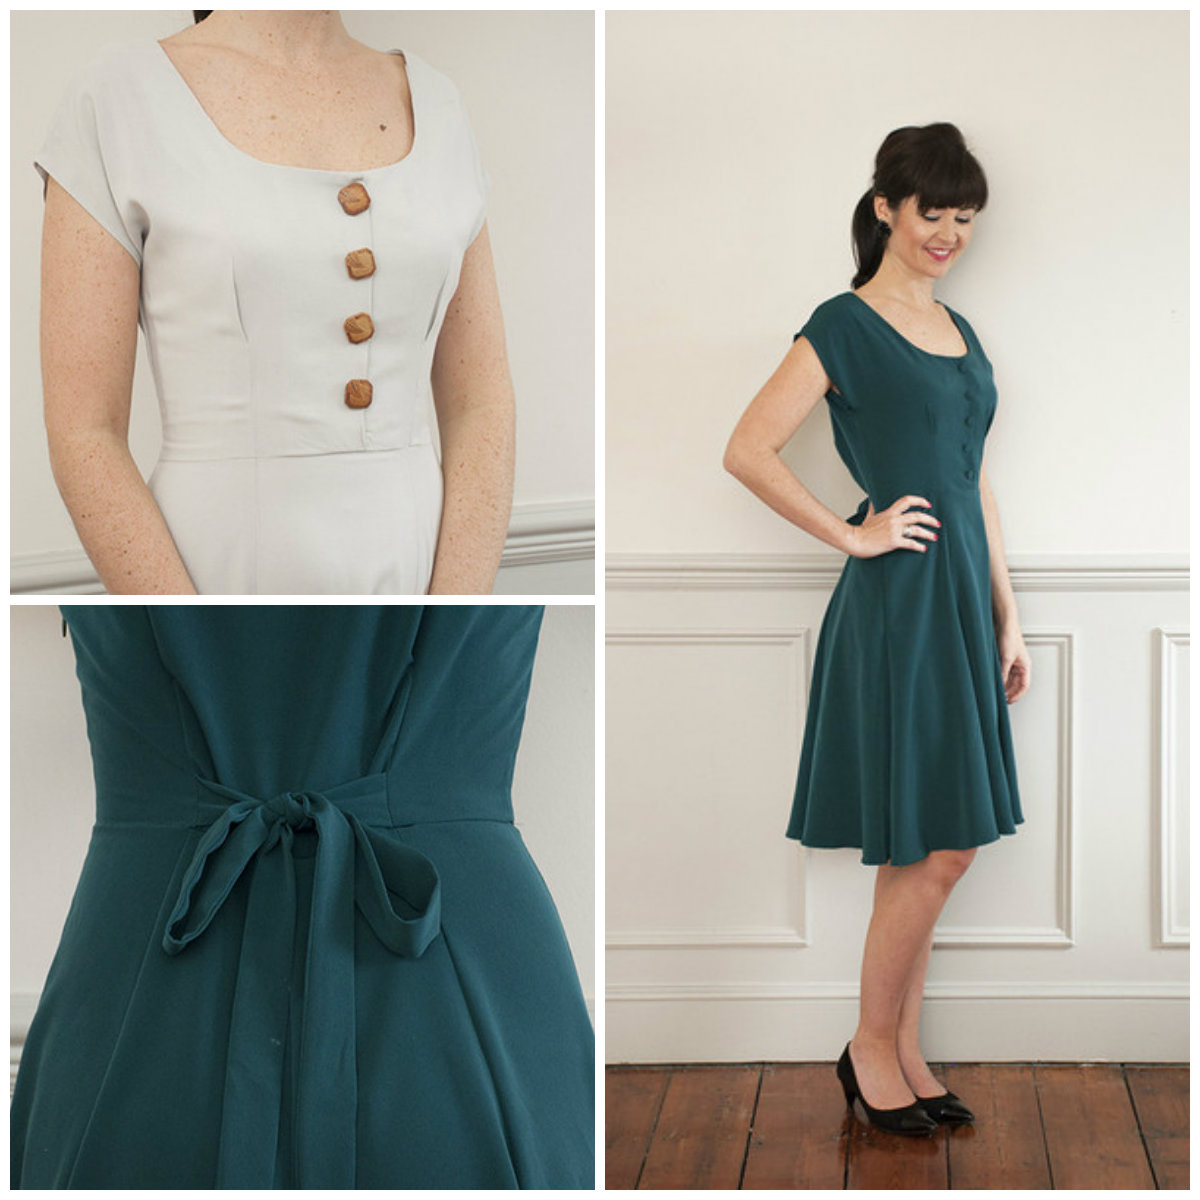 Five dress patterns for autumn - Sew Over It